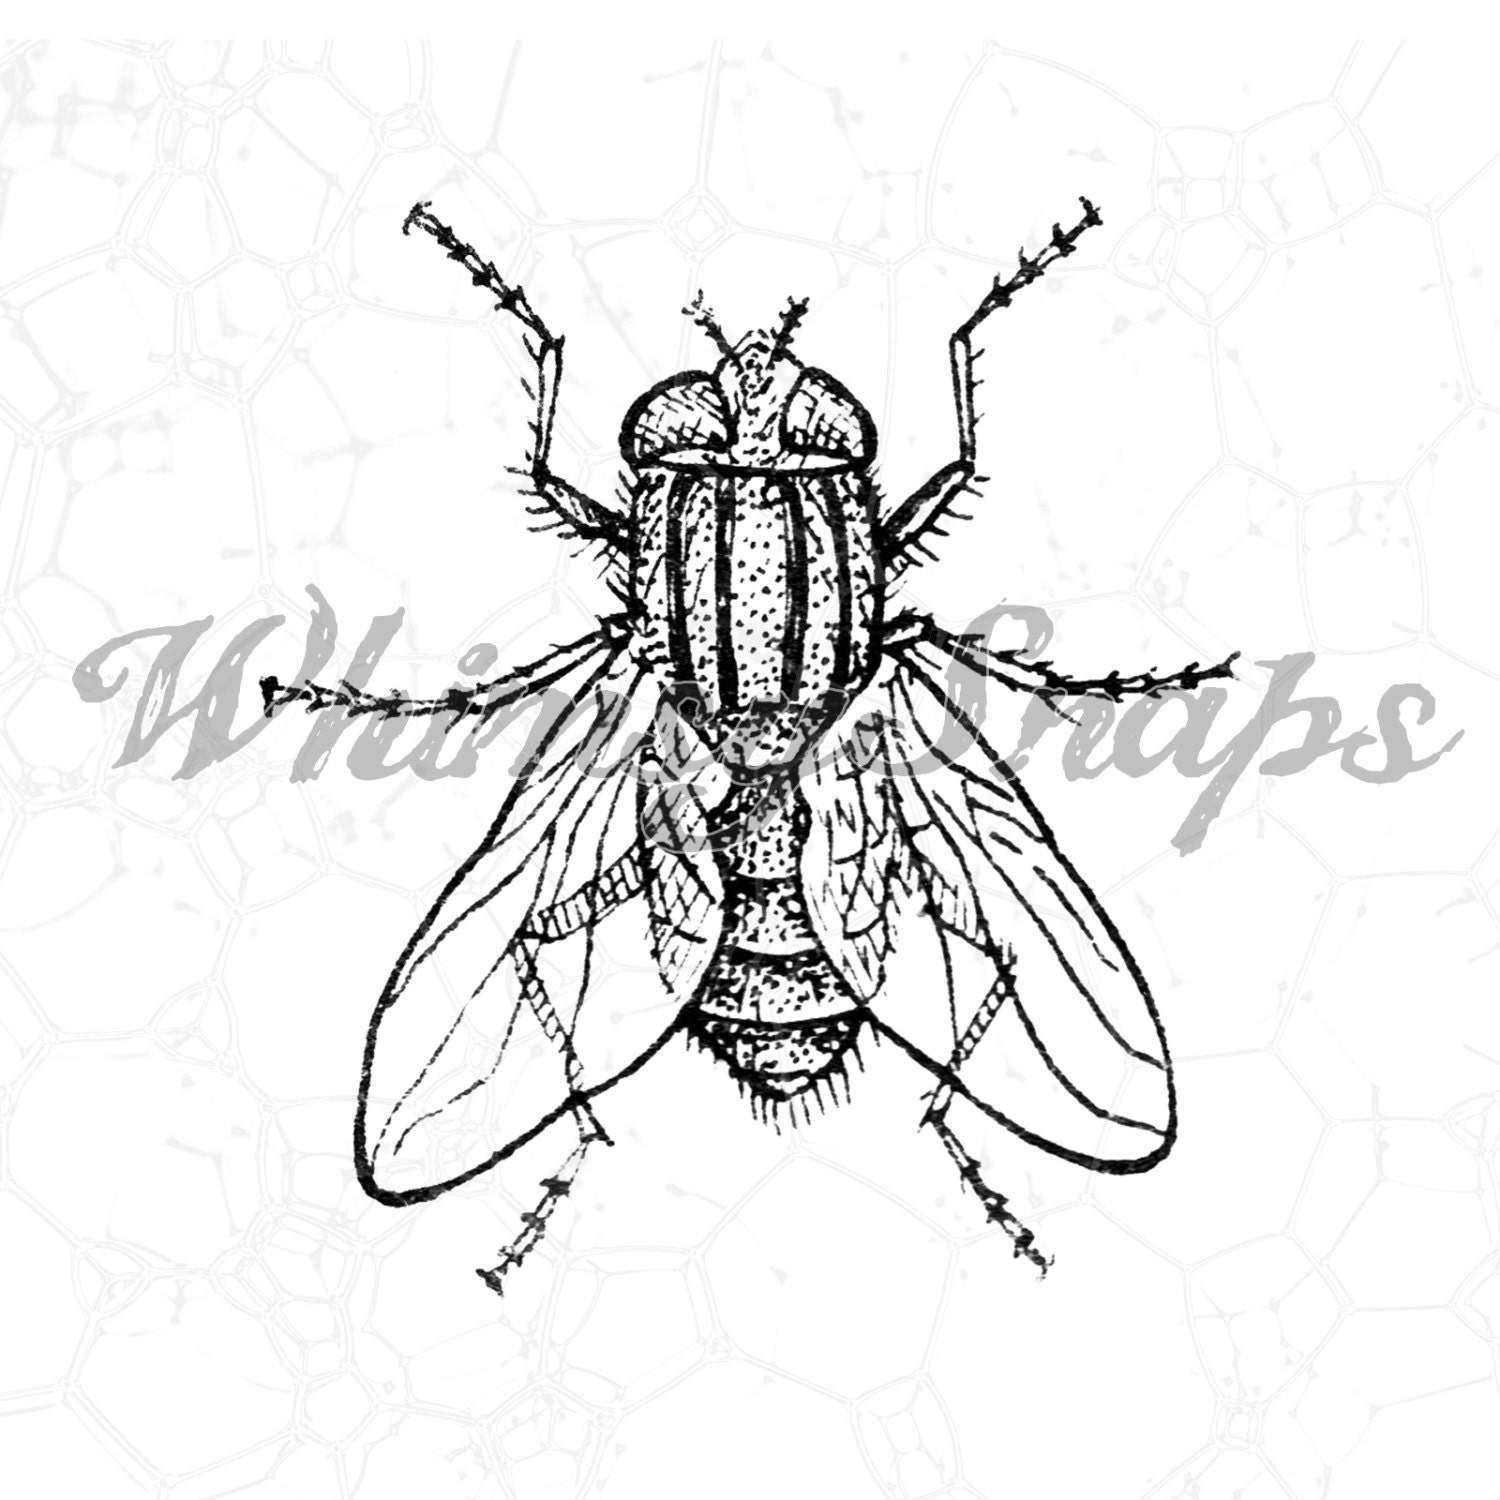 Awesome Housefly Fly Vintage Insect Drawing Digital Image